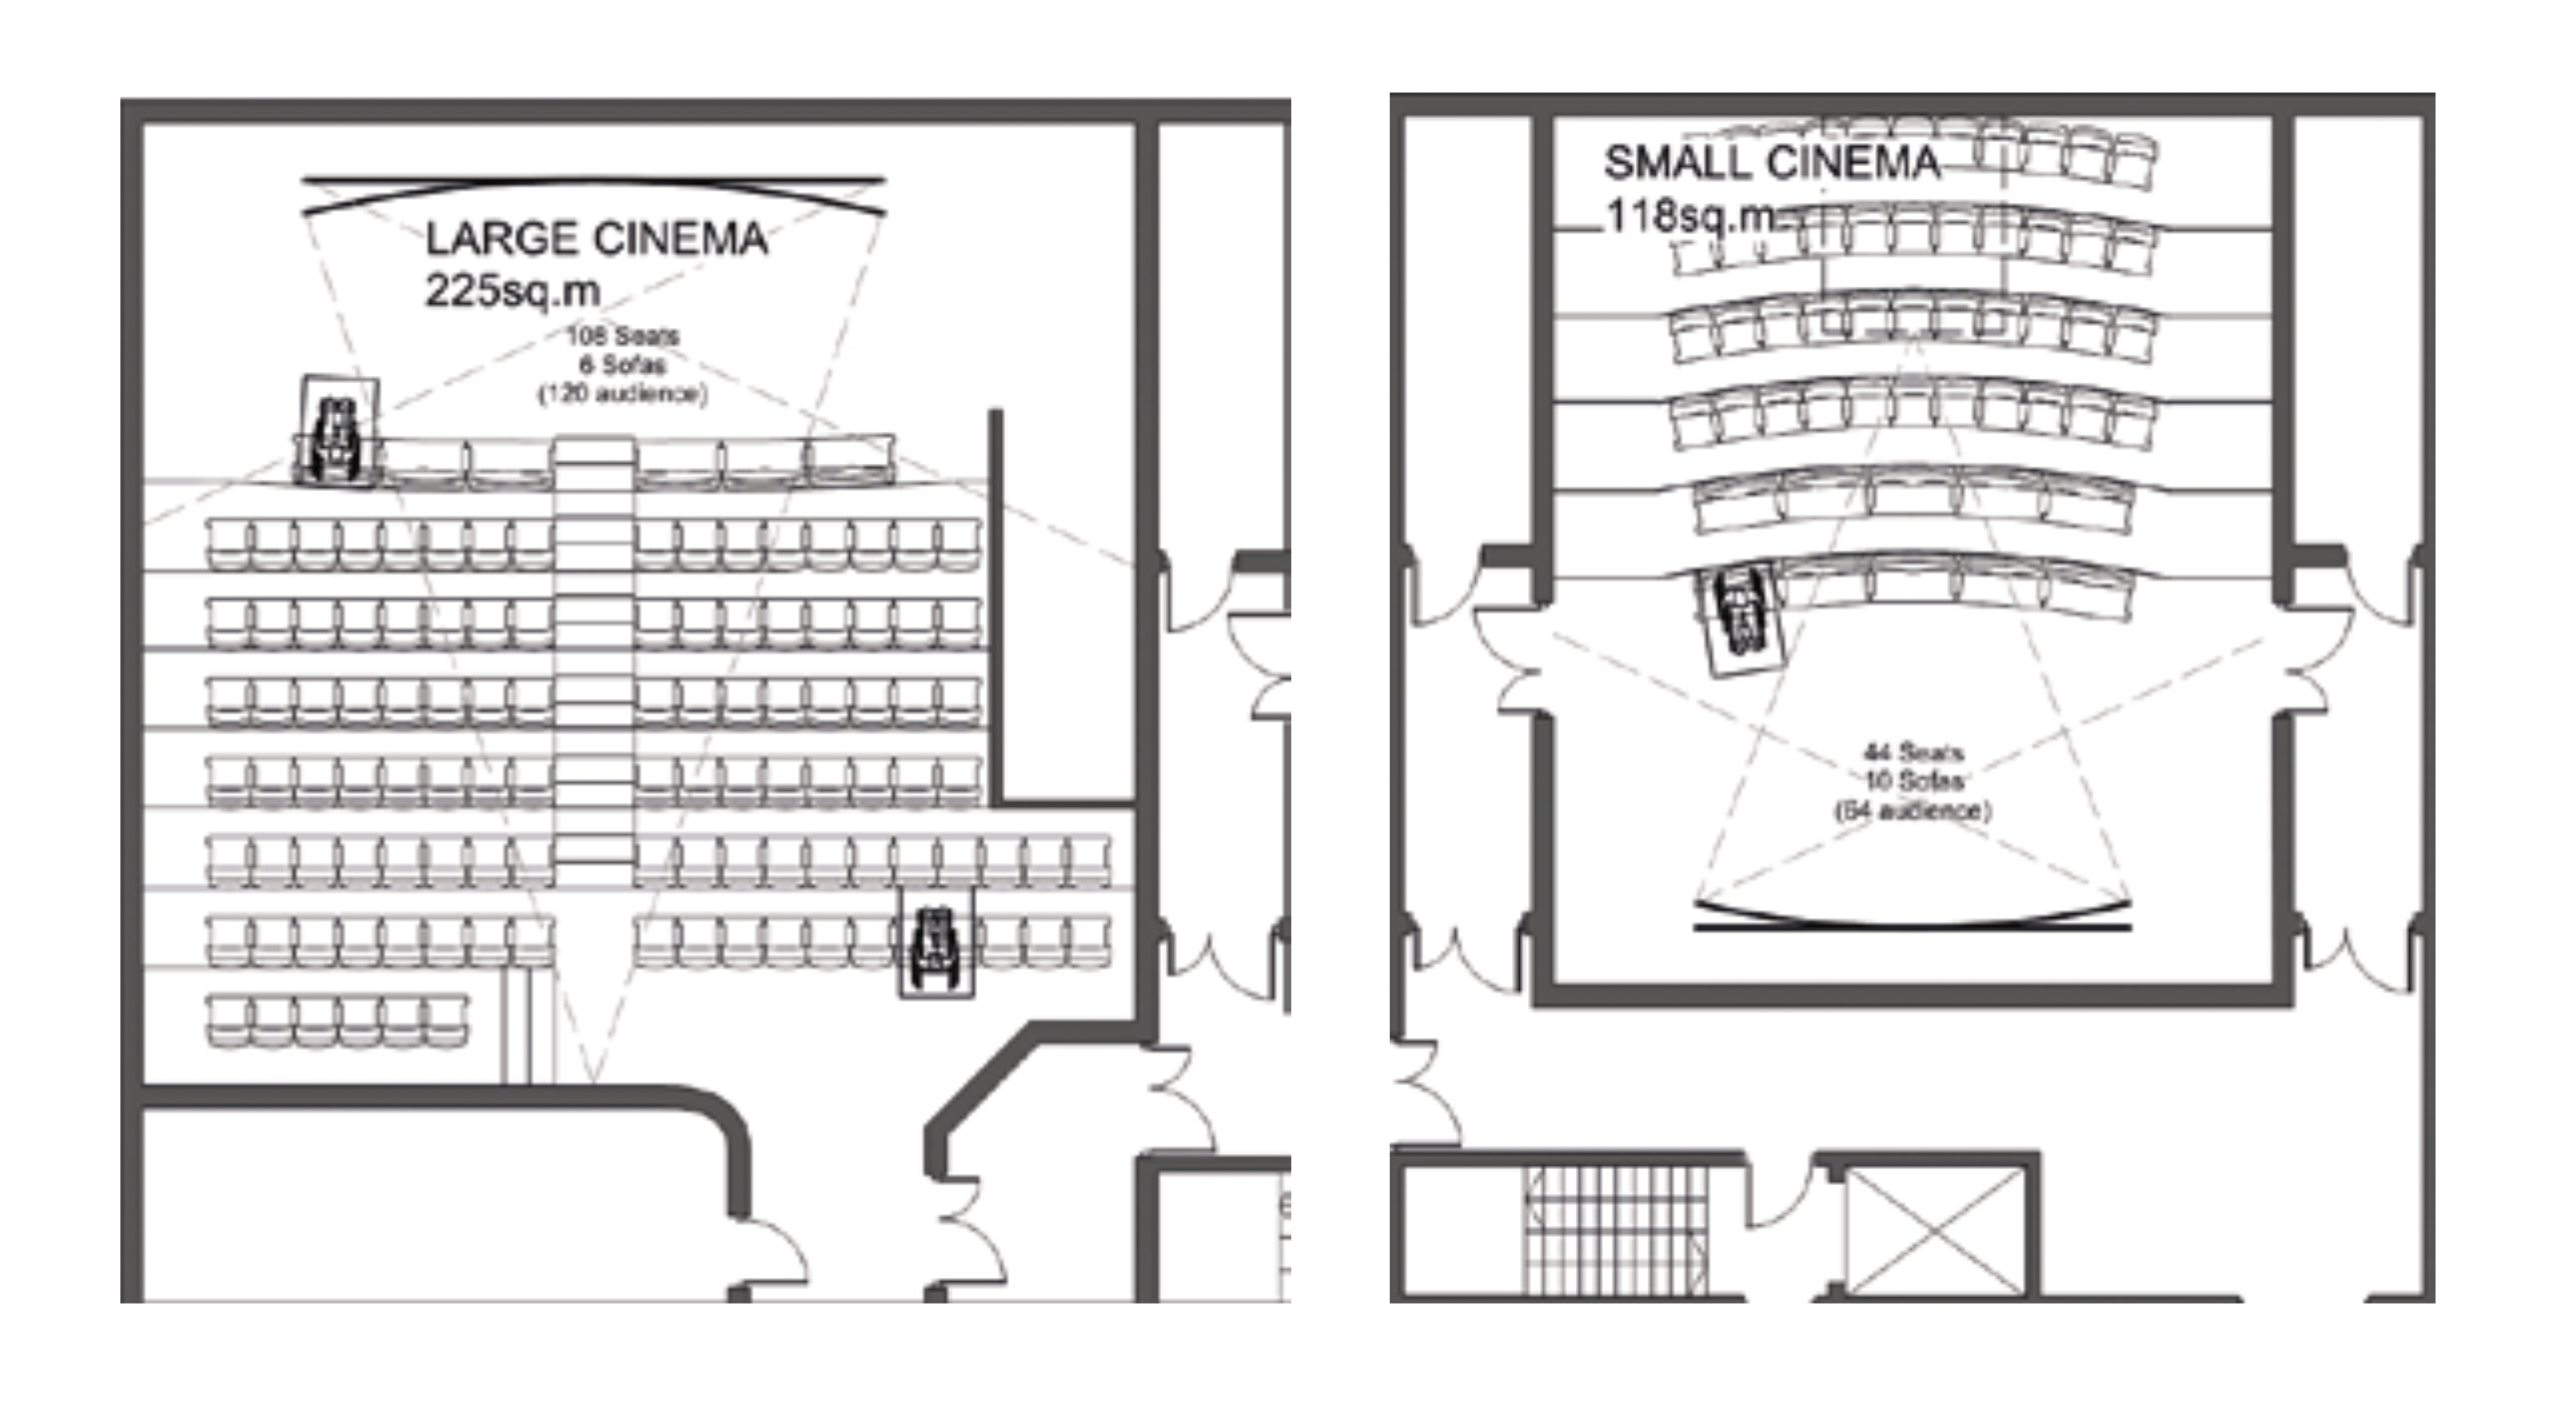 Proposed Cinema Layout